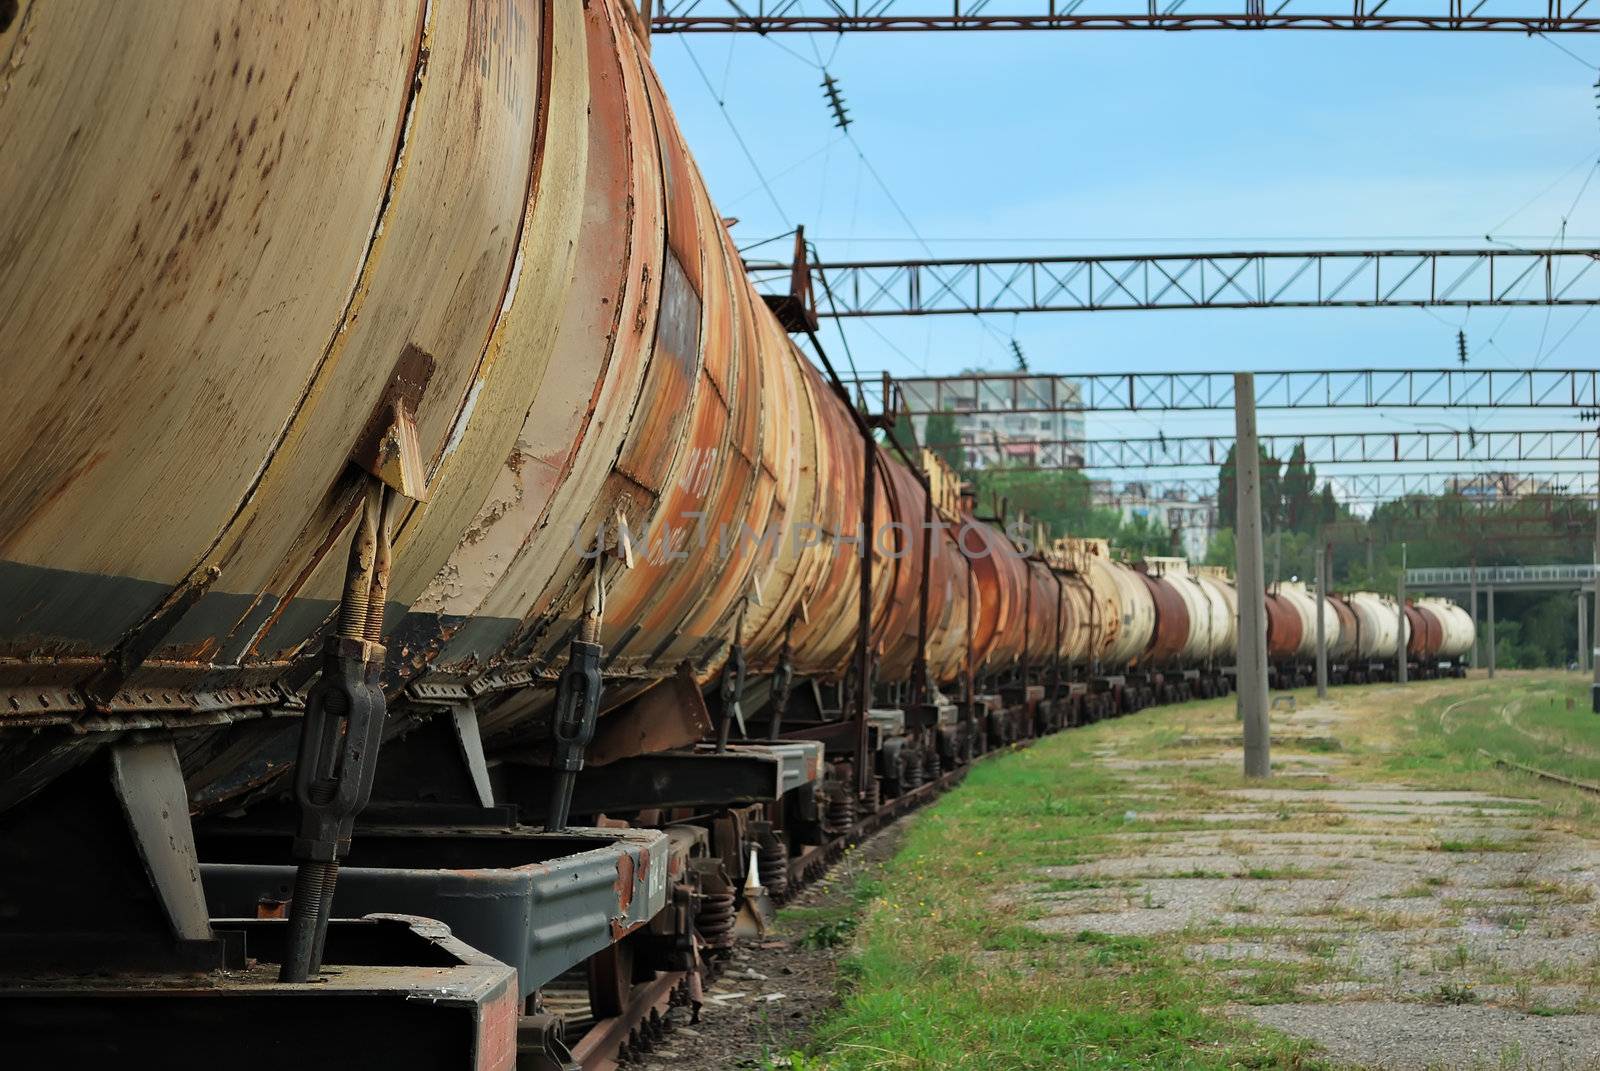 the train transports old tanks with oil and fuel